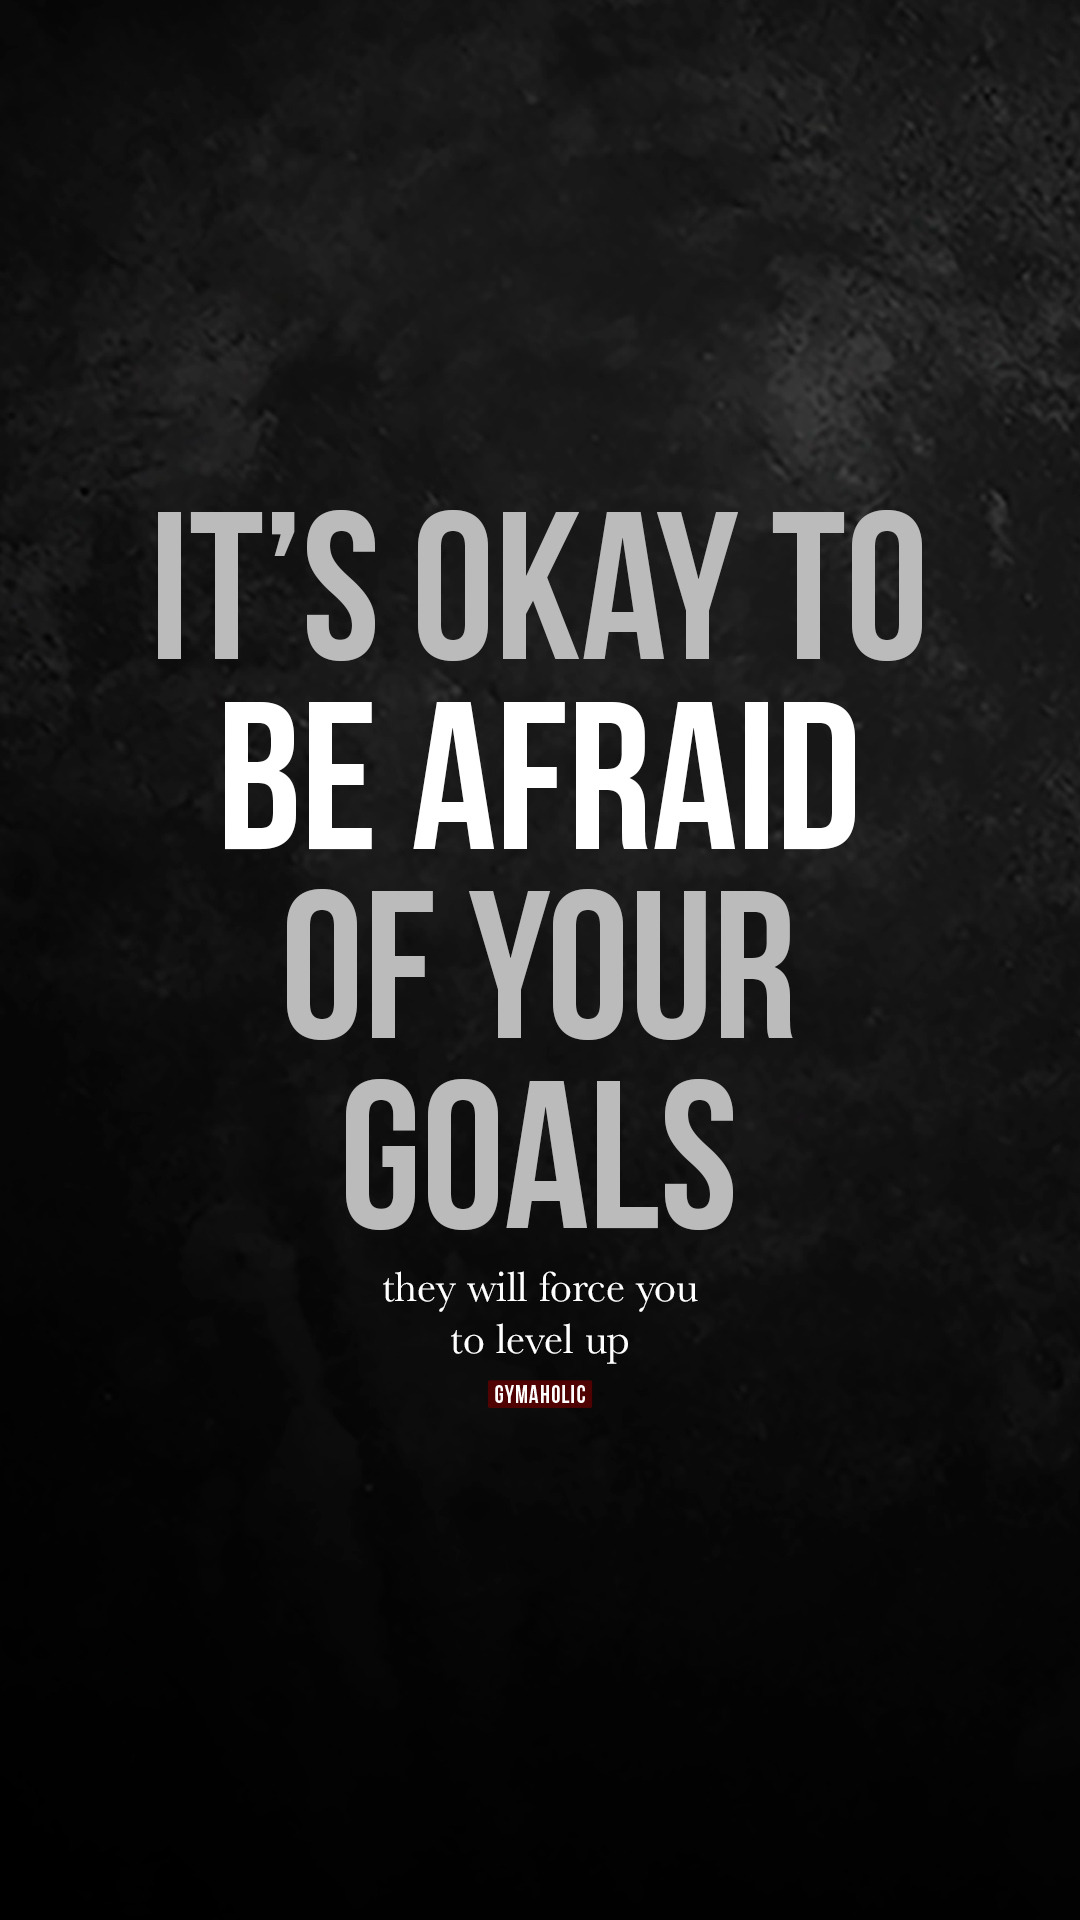 It’s okay to be afraid of your goals